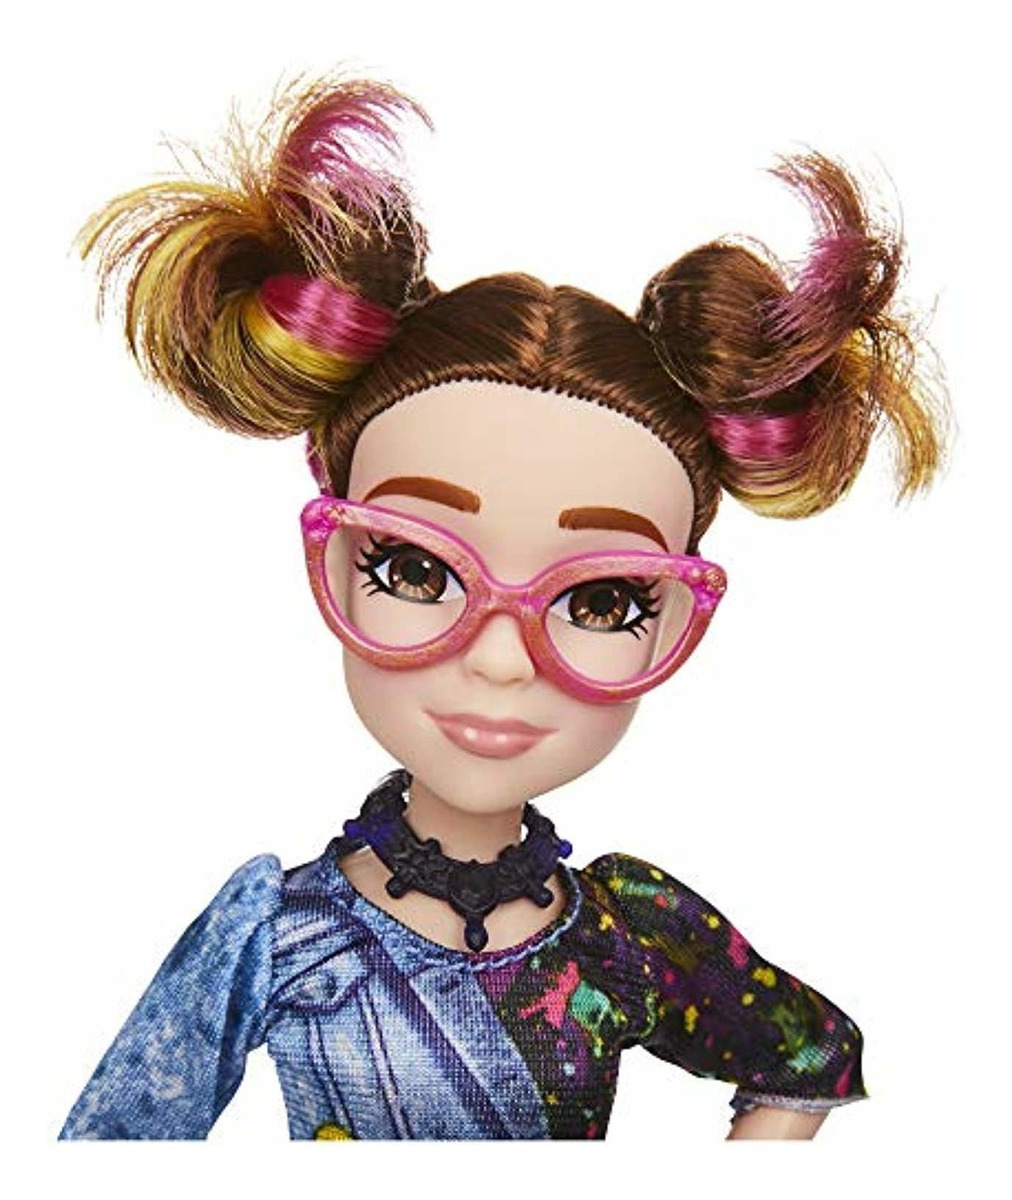 Hasbro Disney Descendants Dizzy Fashion Doll with Outfit and Accessories Inspired by Disneys Descendants 3